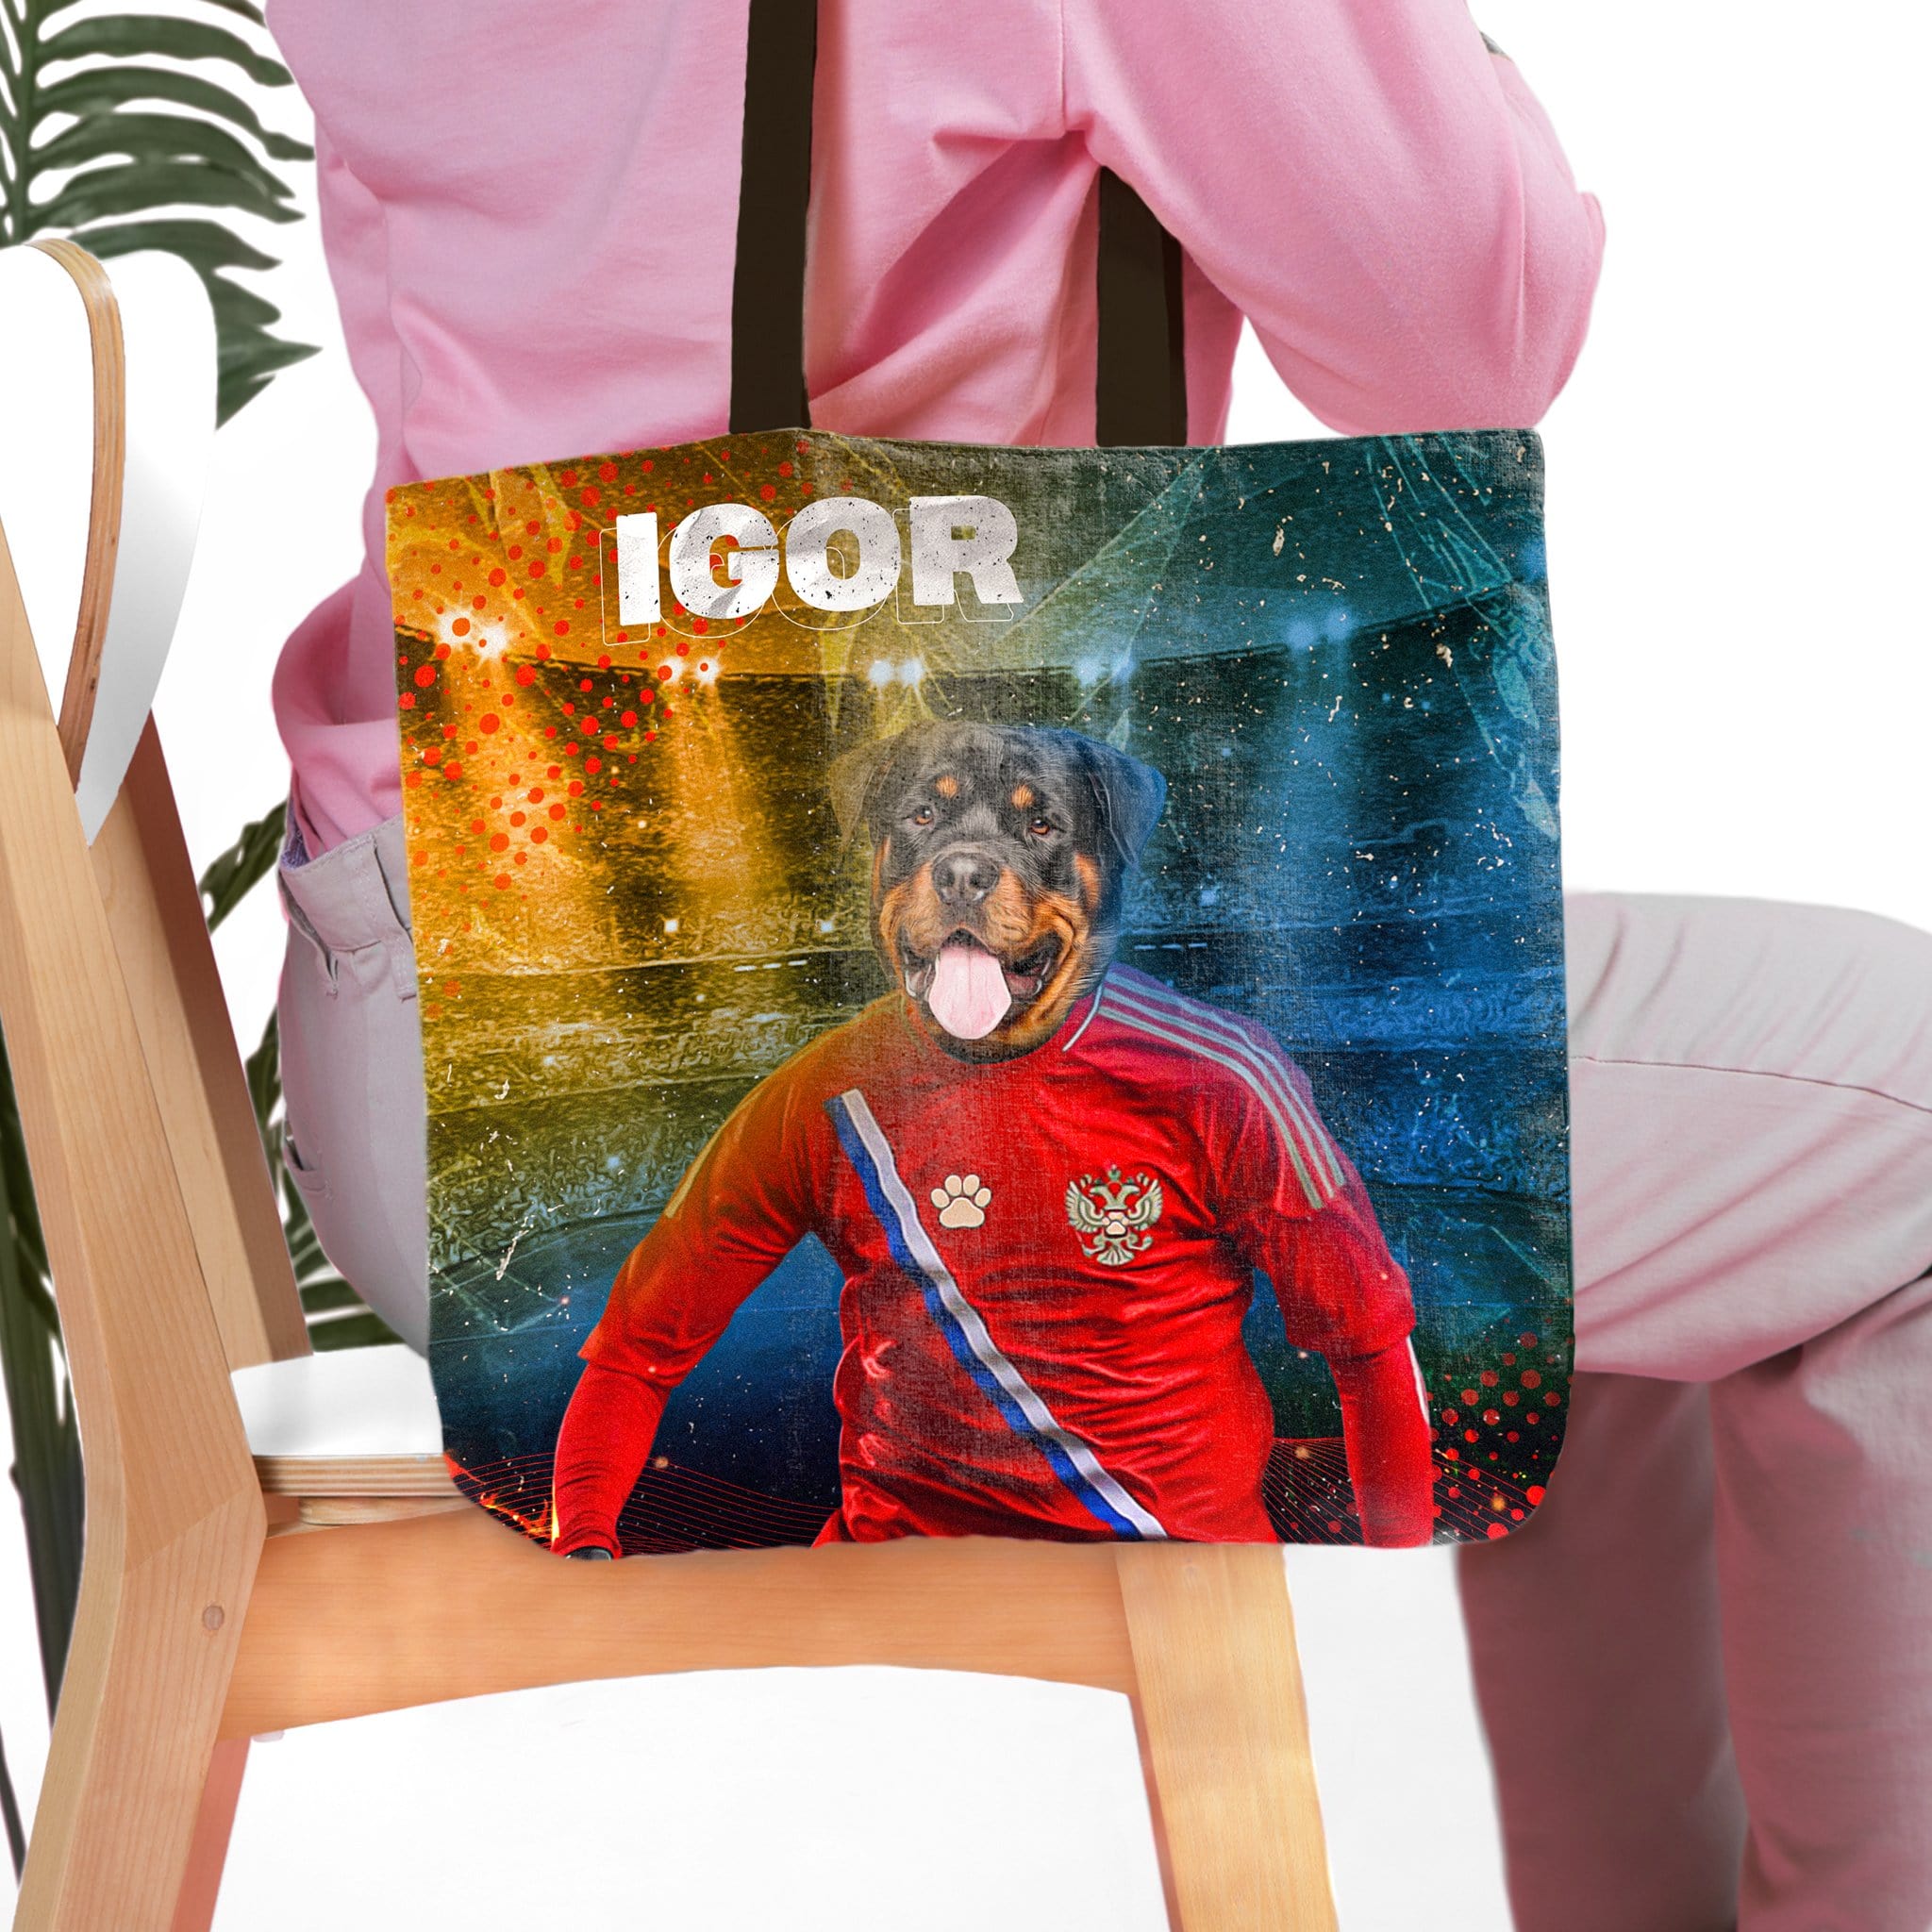 'Russia Doggos Soccer' Personalized Tote Bag